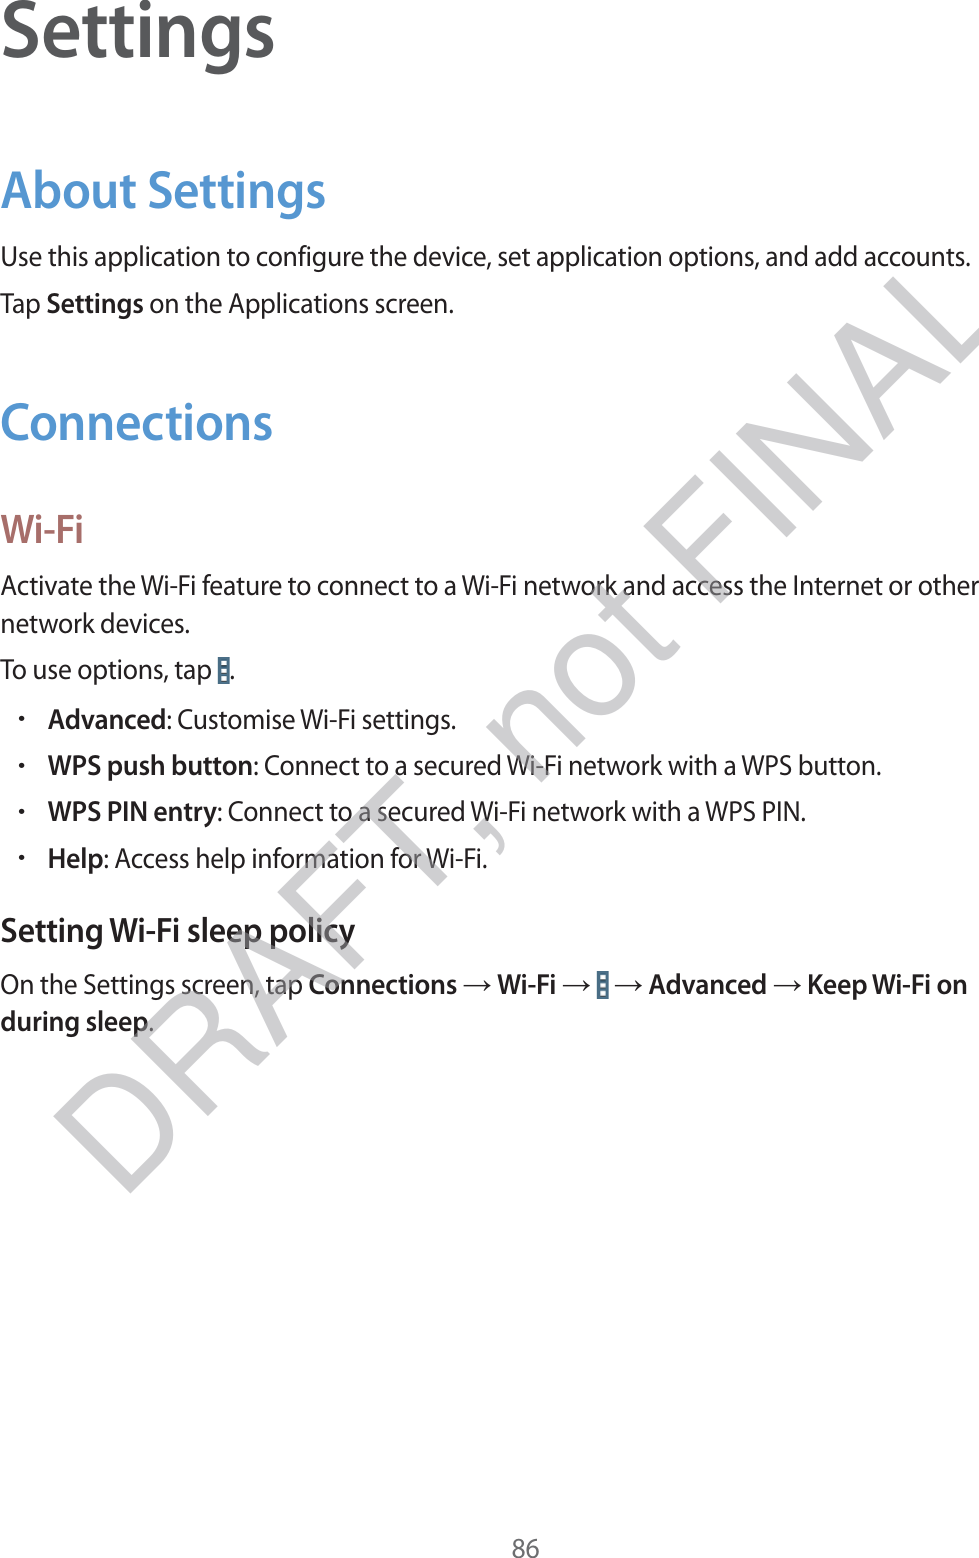 86SettingsAbout SettingsUse this application to configure the device, set application options, and add accounts.Tap Settings on the Applications screen.ConnectionsWi-FiActivate the Wi-Fi feature to connect to a Wi-Fi network and access the Internet or other network devices.To use options, tap  .rAdvanced: Customise Wi-Fi settings.rWPS push button: Connect to a secured Wi-Fi network with a WPS button.rWPS PIN entry: Connect to a secured Wi-Fi network with a WPS PIN.rHelp: Access help information for Wi-Fi.Setting Wi-Fi sleep policyOn the Settings screen, tap Connections → Wi-Fi →   → Advanced → Keep Wi-Fi on during sleep.DRAFT, not FINAL